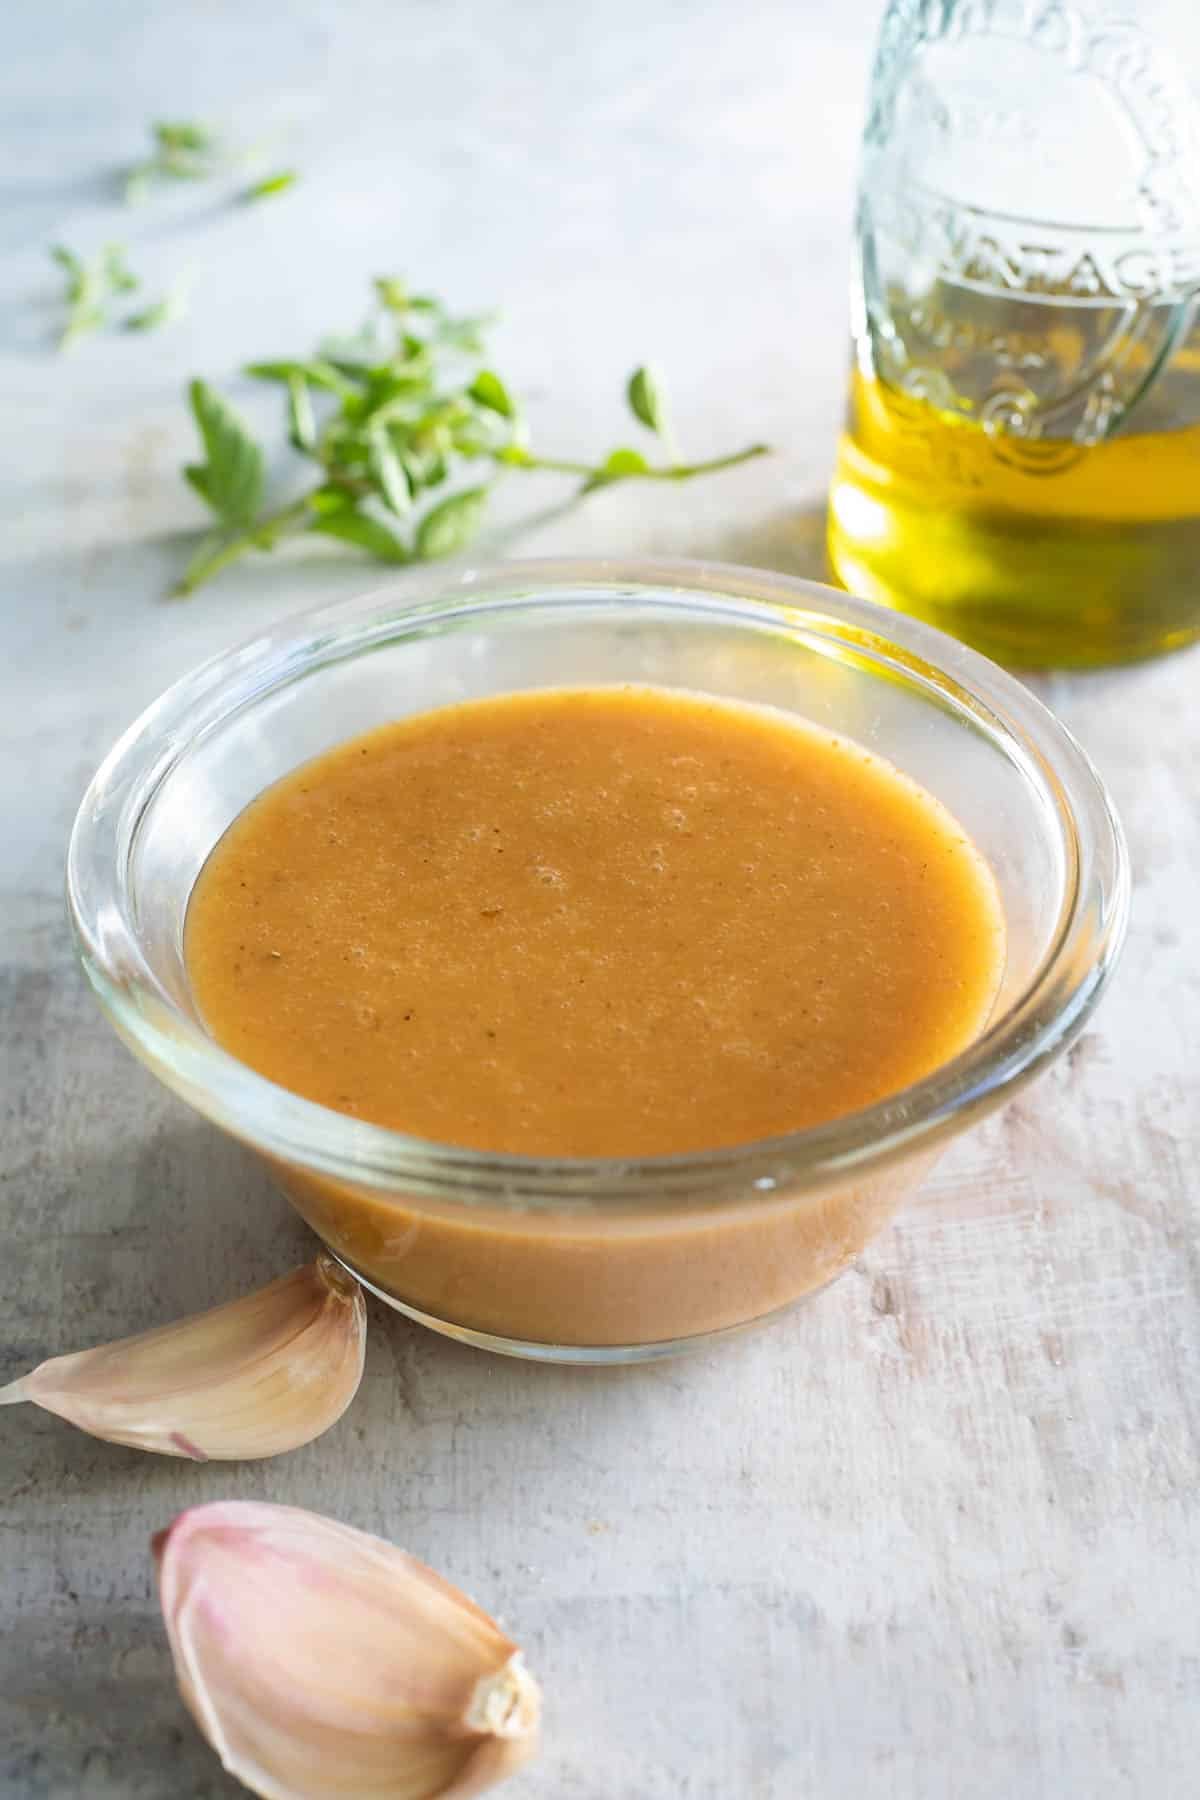 Chipotle vinaigrette in a clear bowl on a countertop.